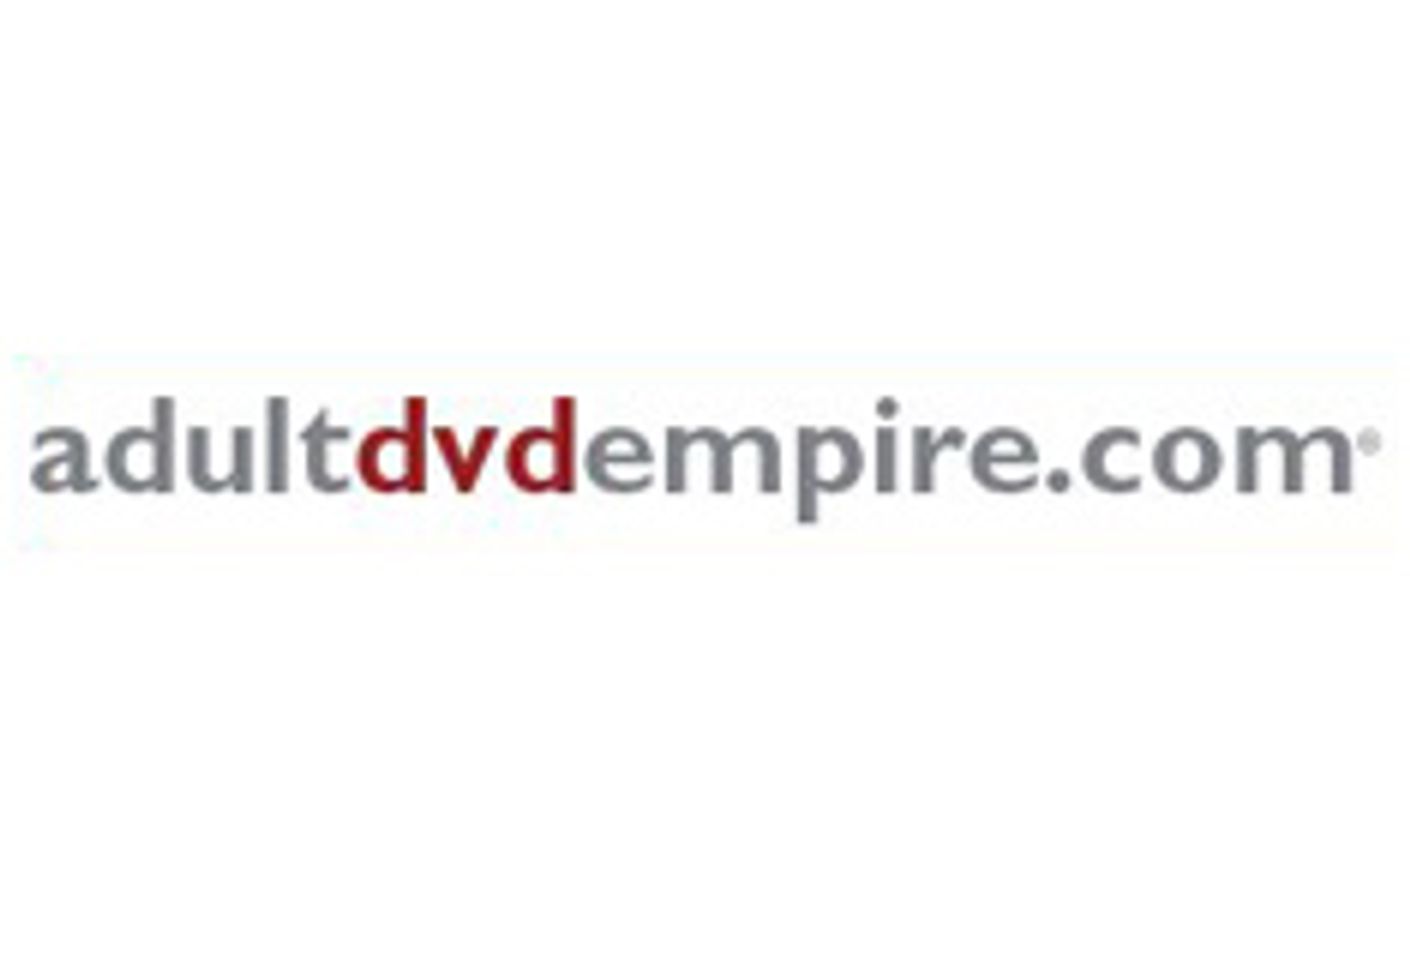 Adult DVD Empire VOD Removes Licensing, Improves Usability